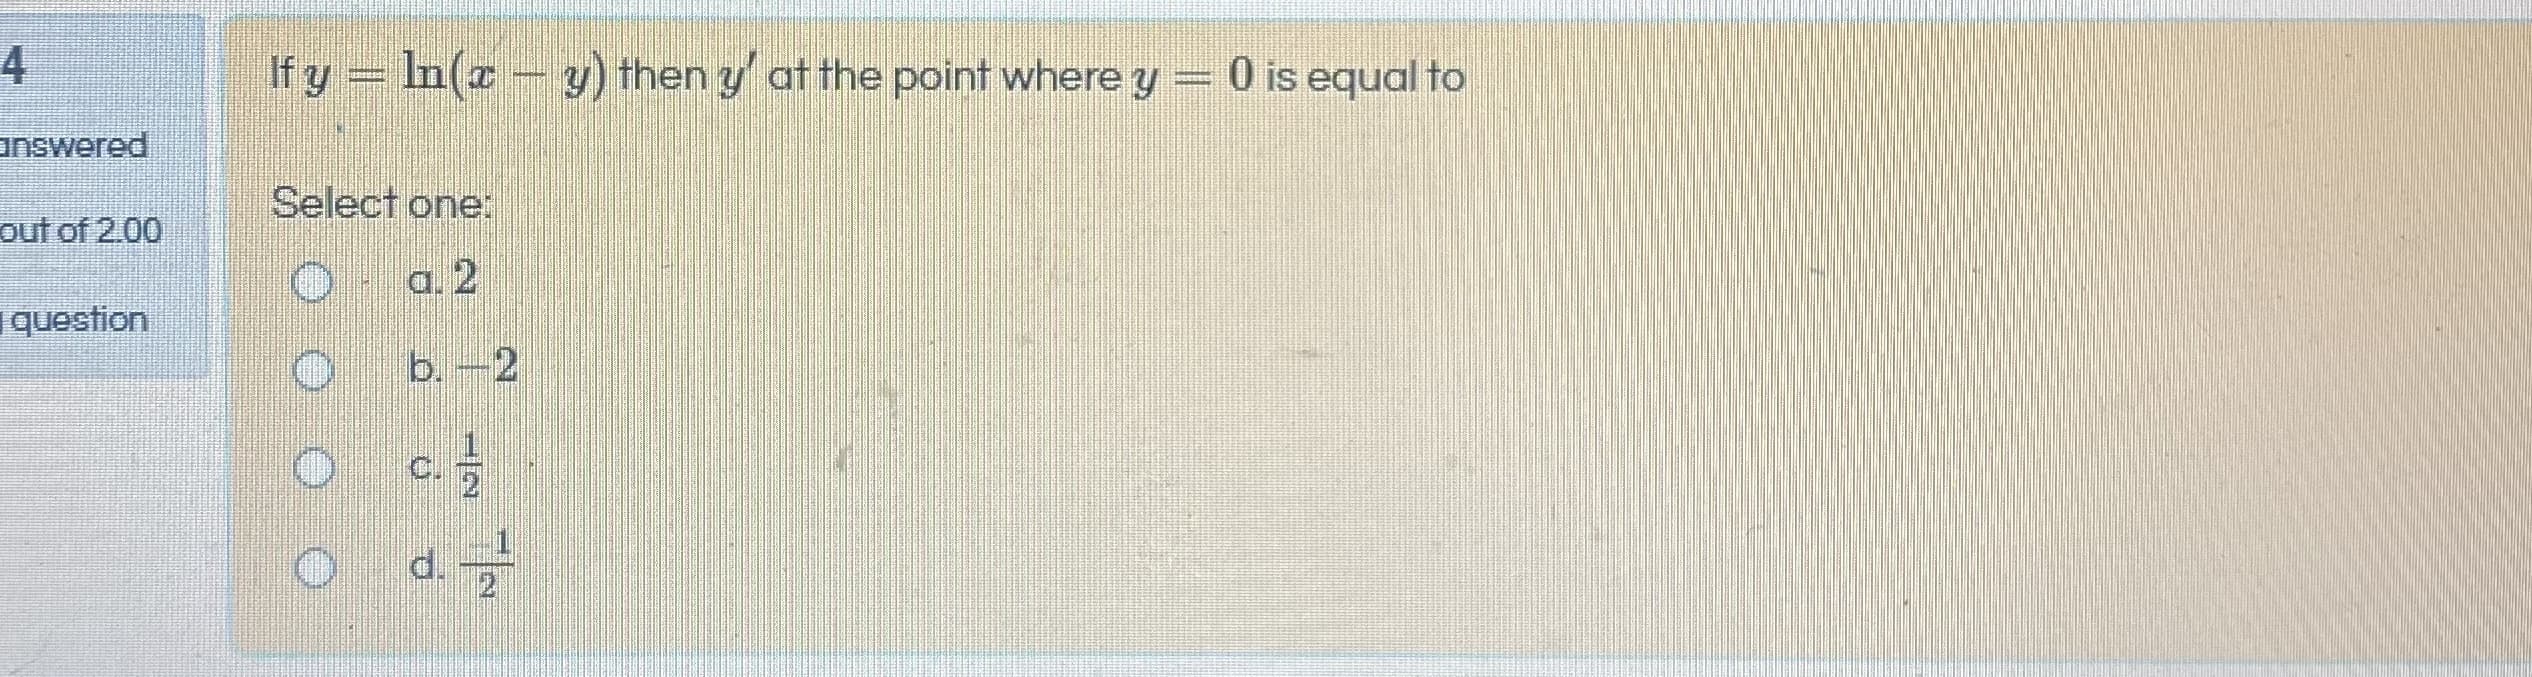 If y In(z- y) then y at the point where y = 0 is equal to
